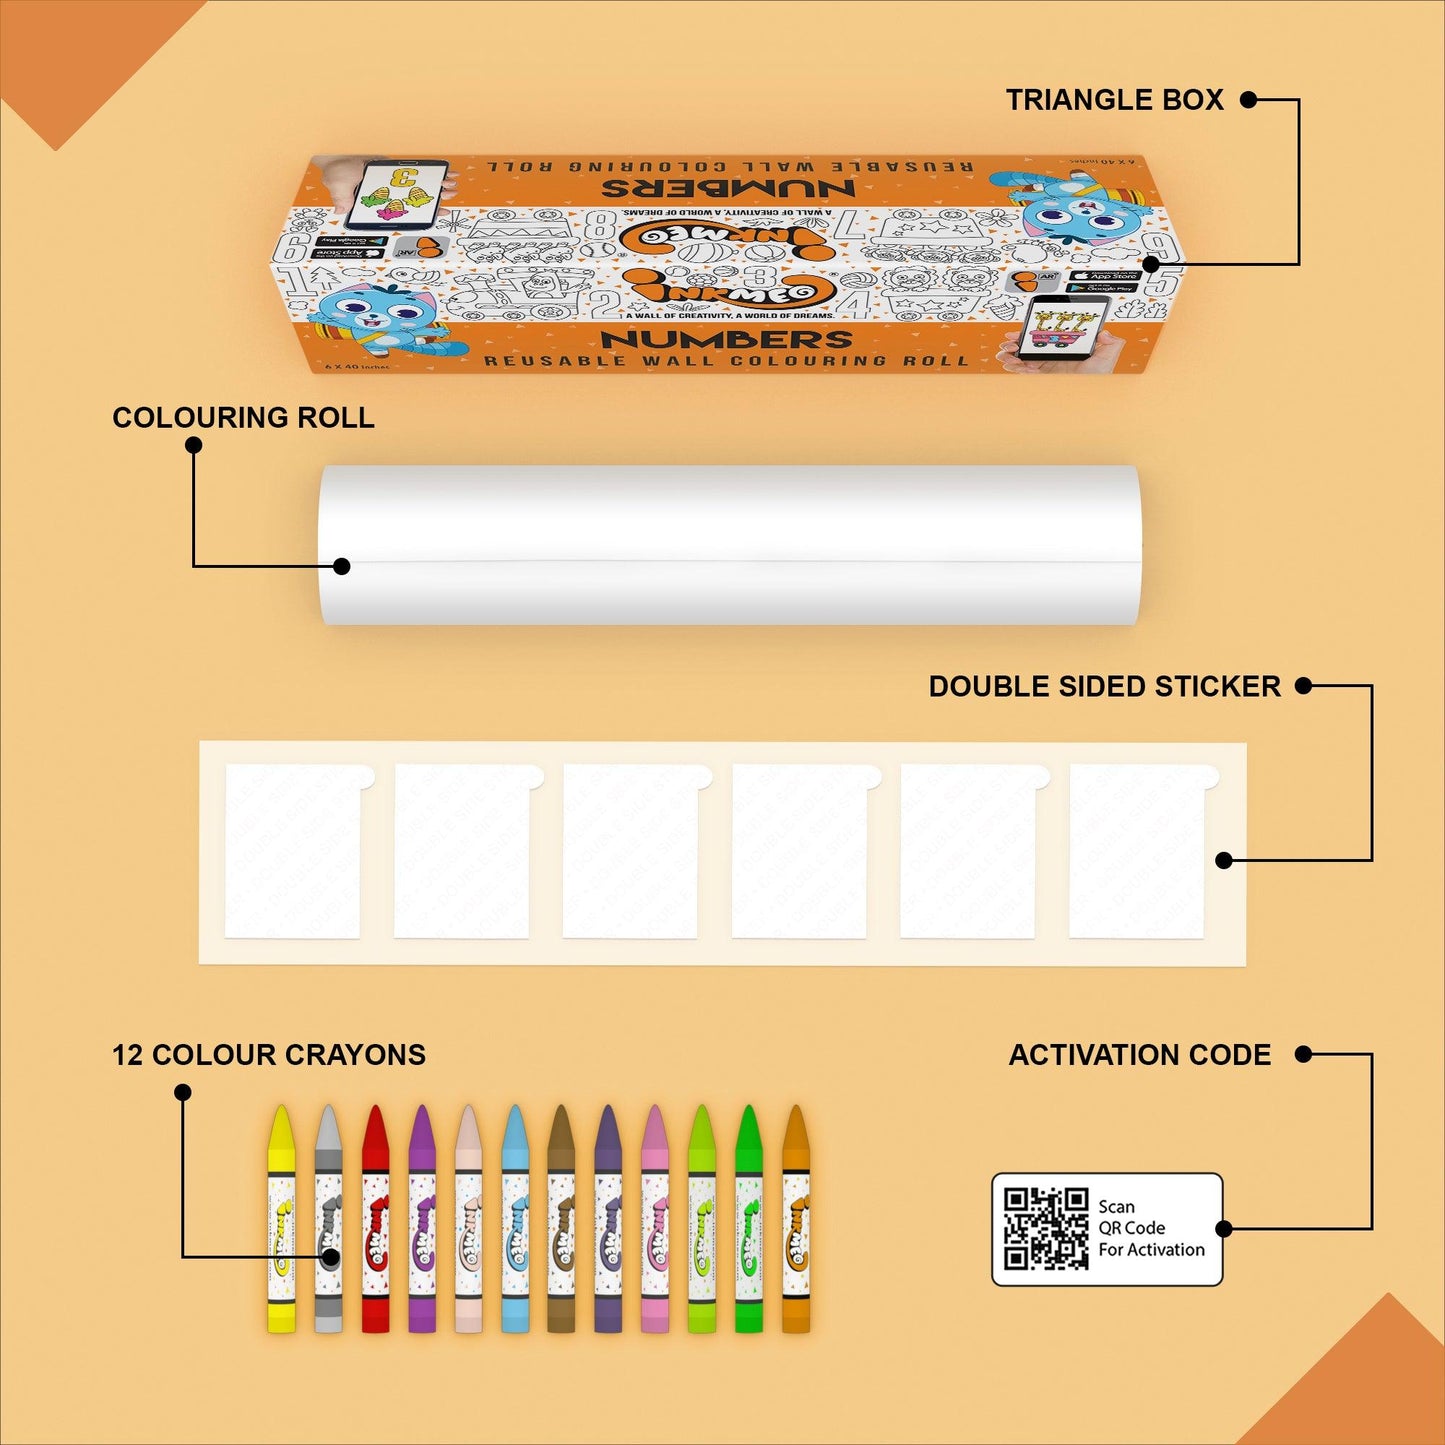 The image depicts a orange background with a single triangular box, a coloring roll, 6 double-sided stickers, 12 colored crayons, and an activation code.